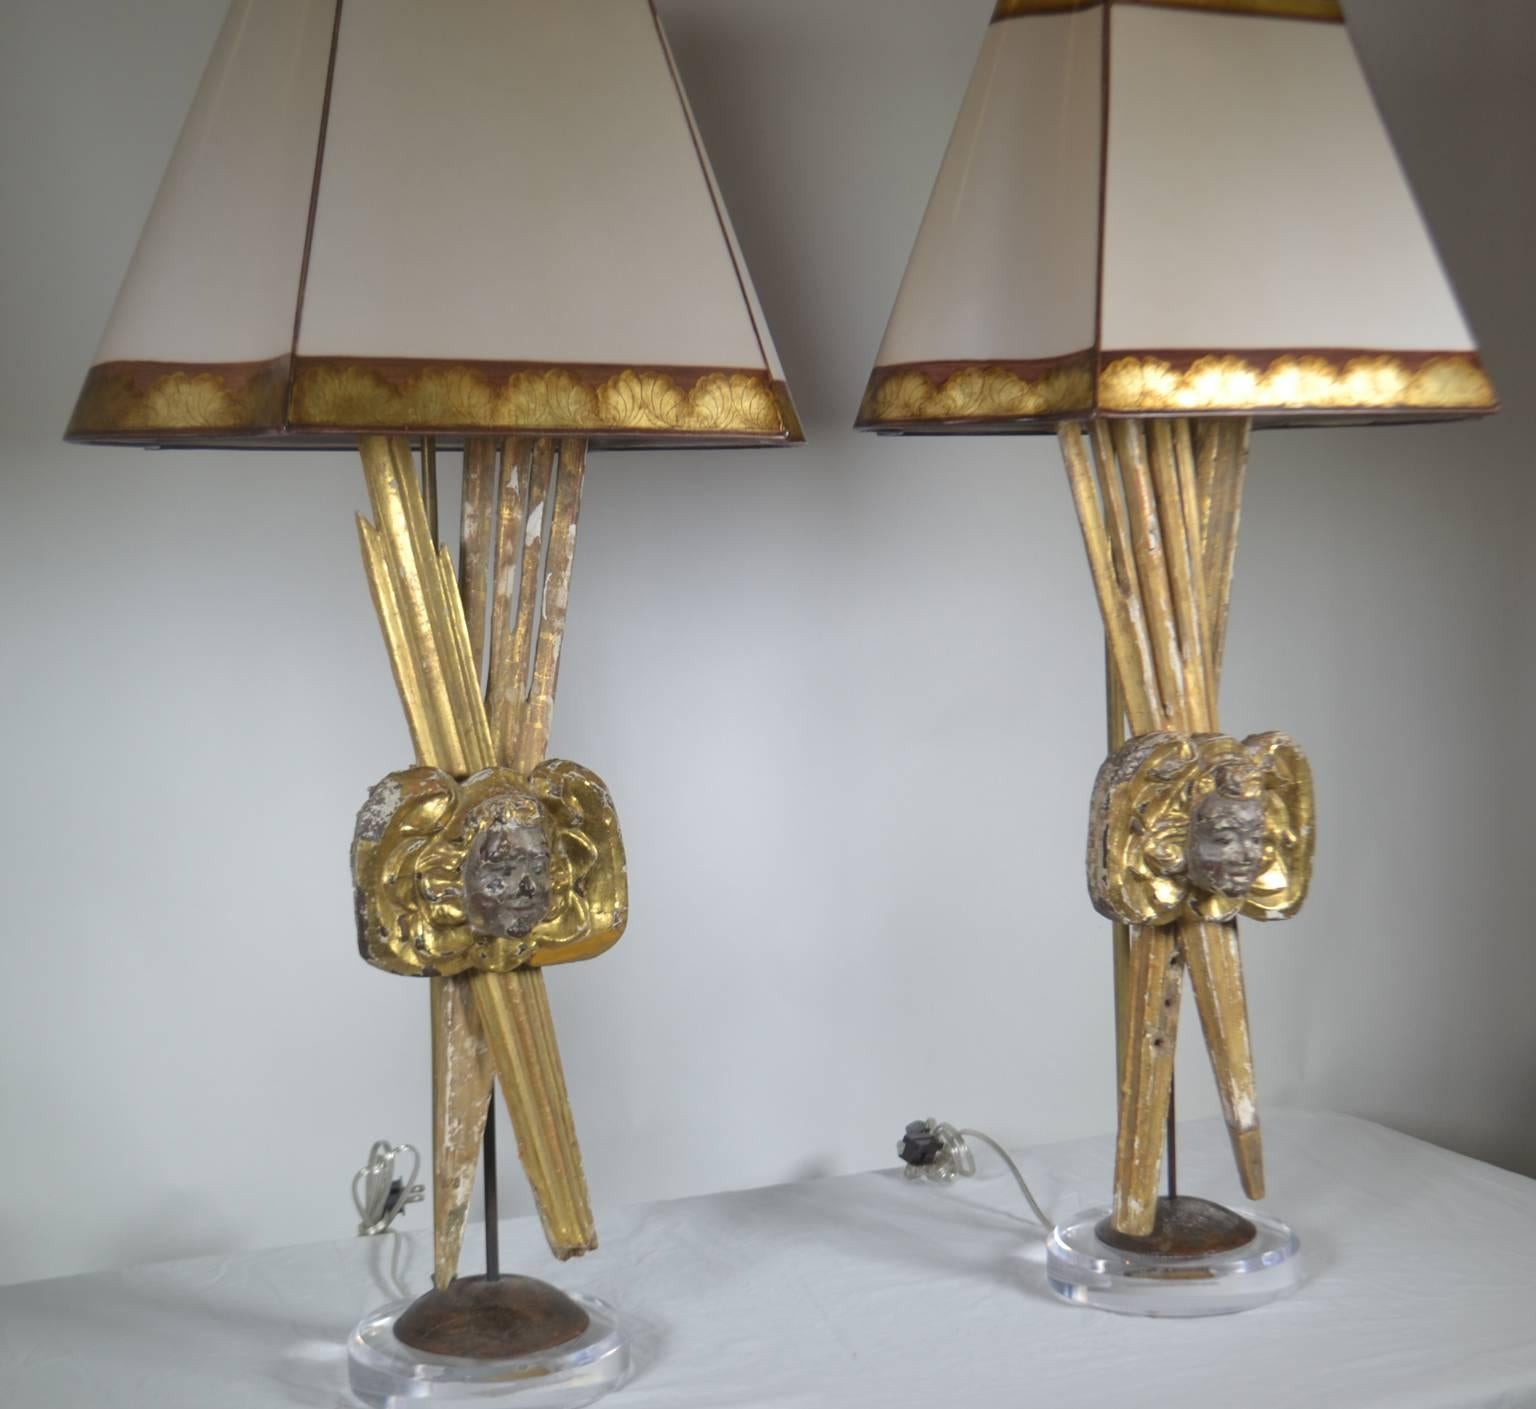 Pair of Italian 18th century giltwood pieces that are made into lamps with putti faces and sunbursts.